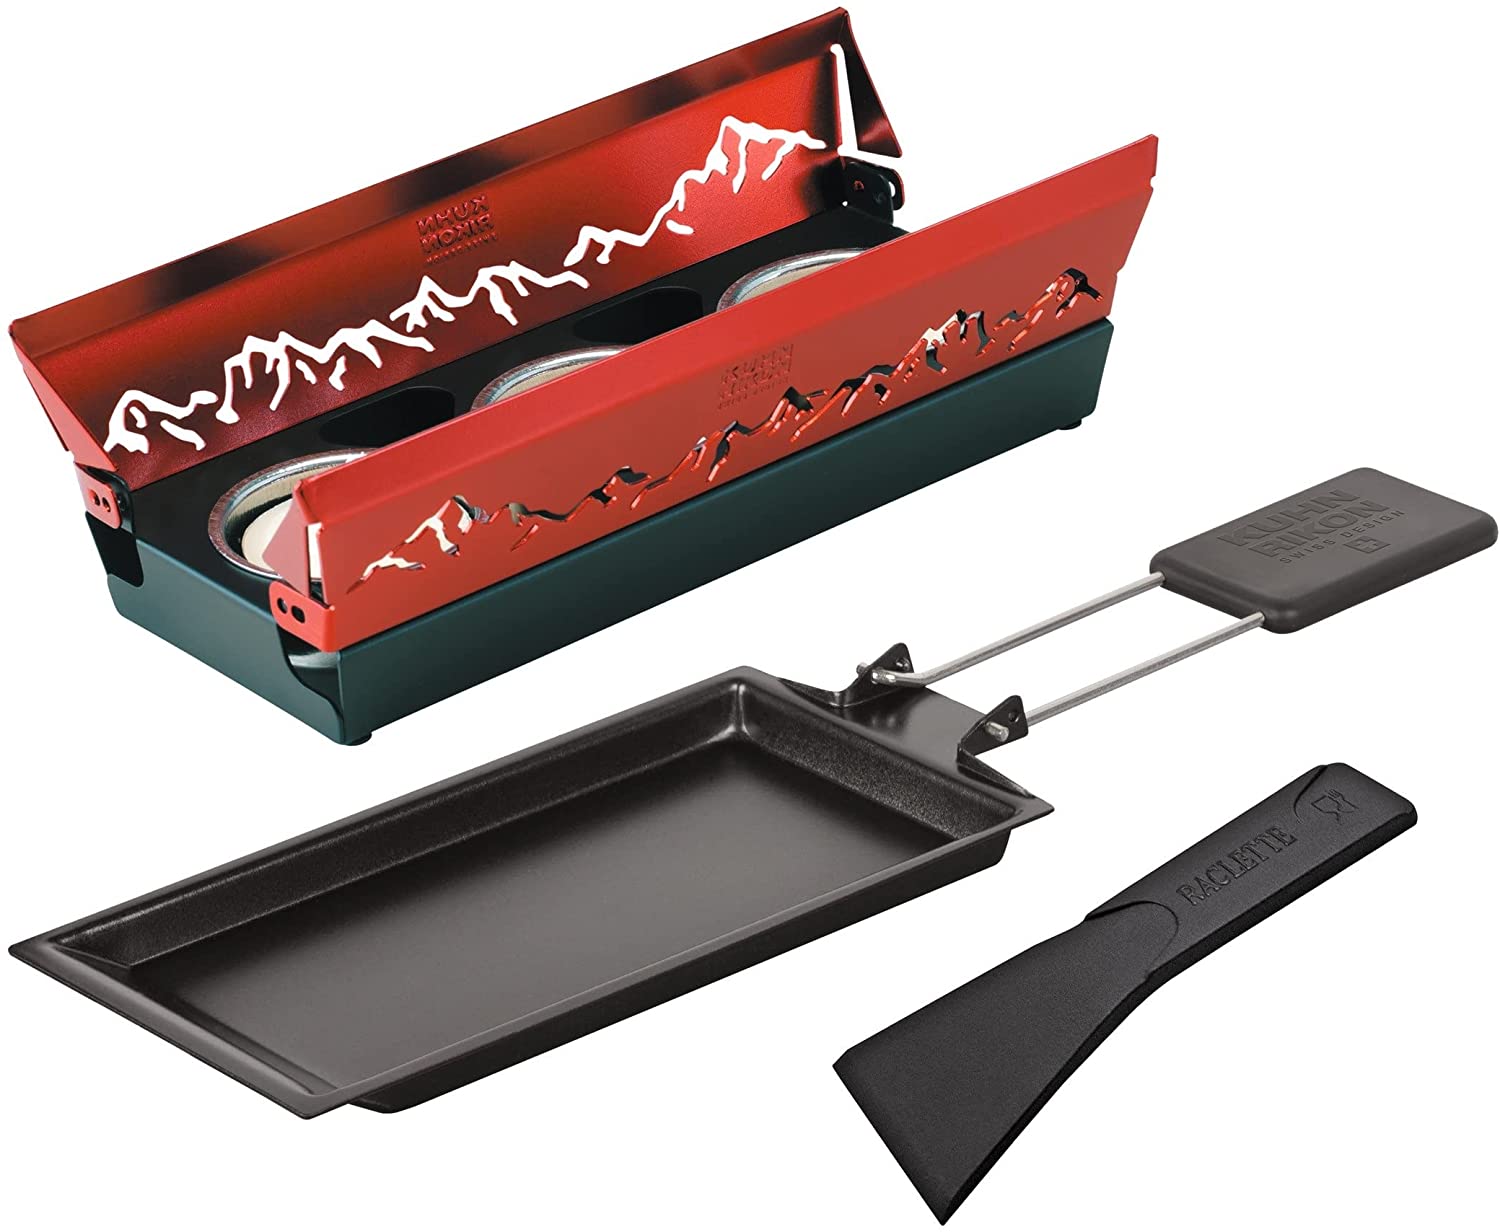 KUHN RIKON Candle Light Mini Alpine Glow Raclette Set, Red, Non-Stick Grill Pans, with Tea Light, Stainless Steel, 9 x 9 x 20 cm, 5 Units